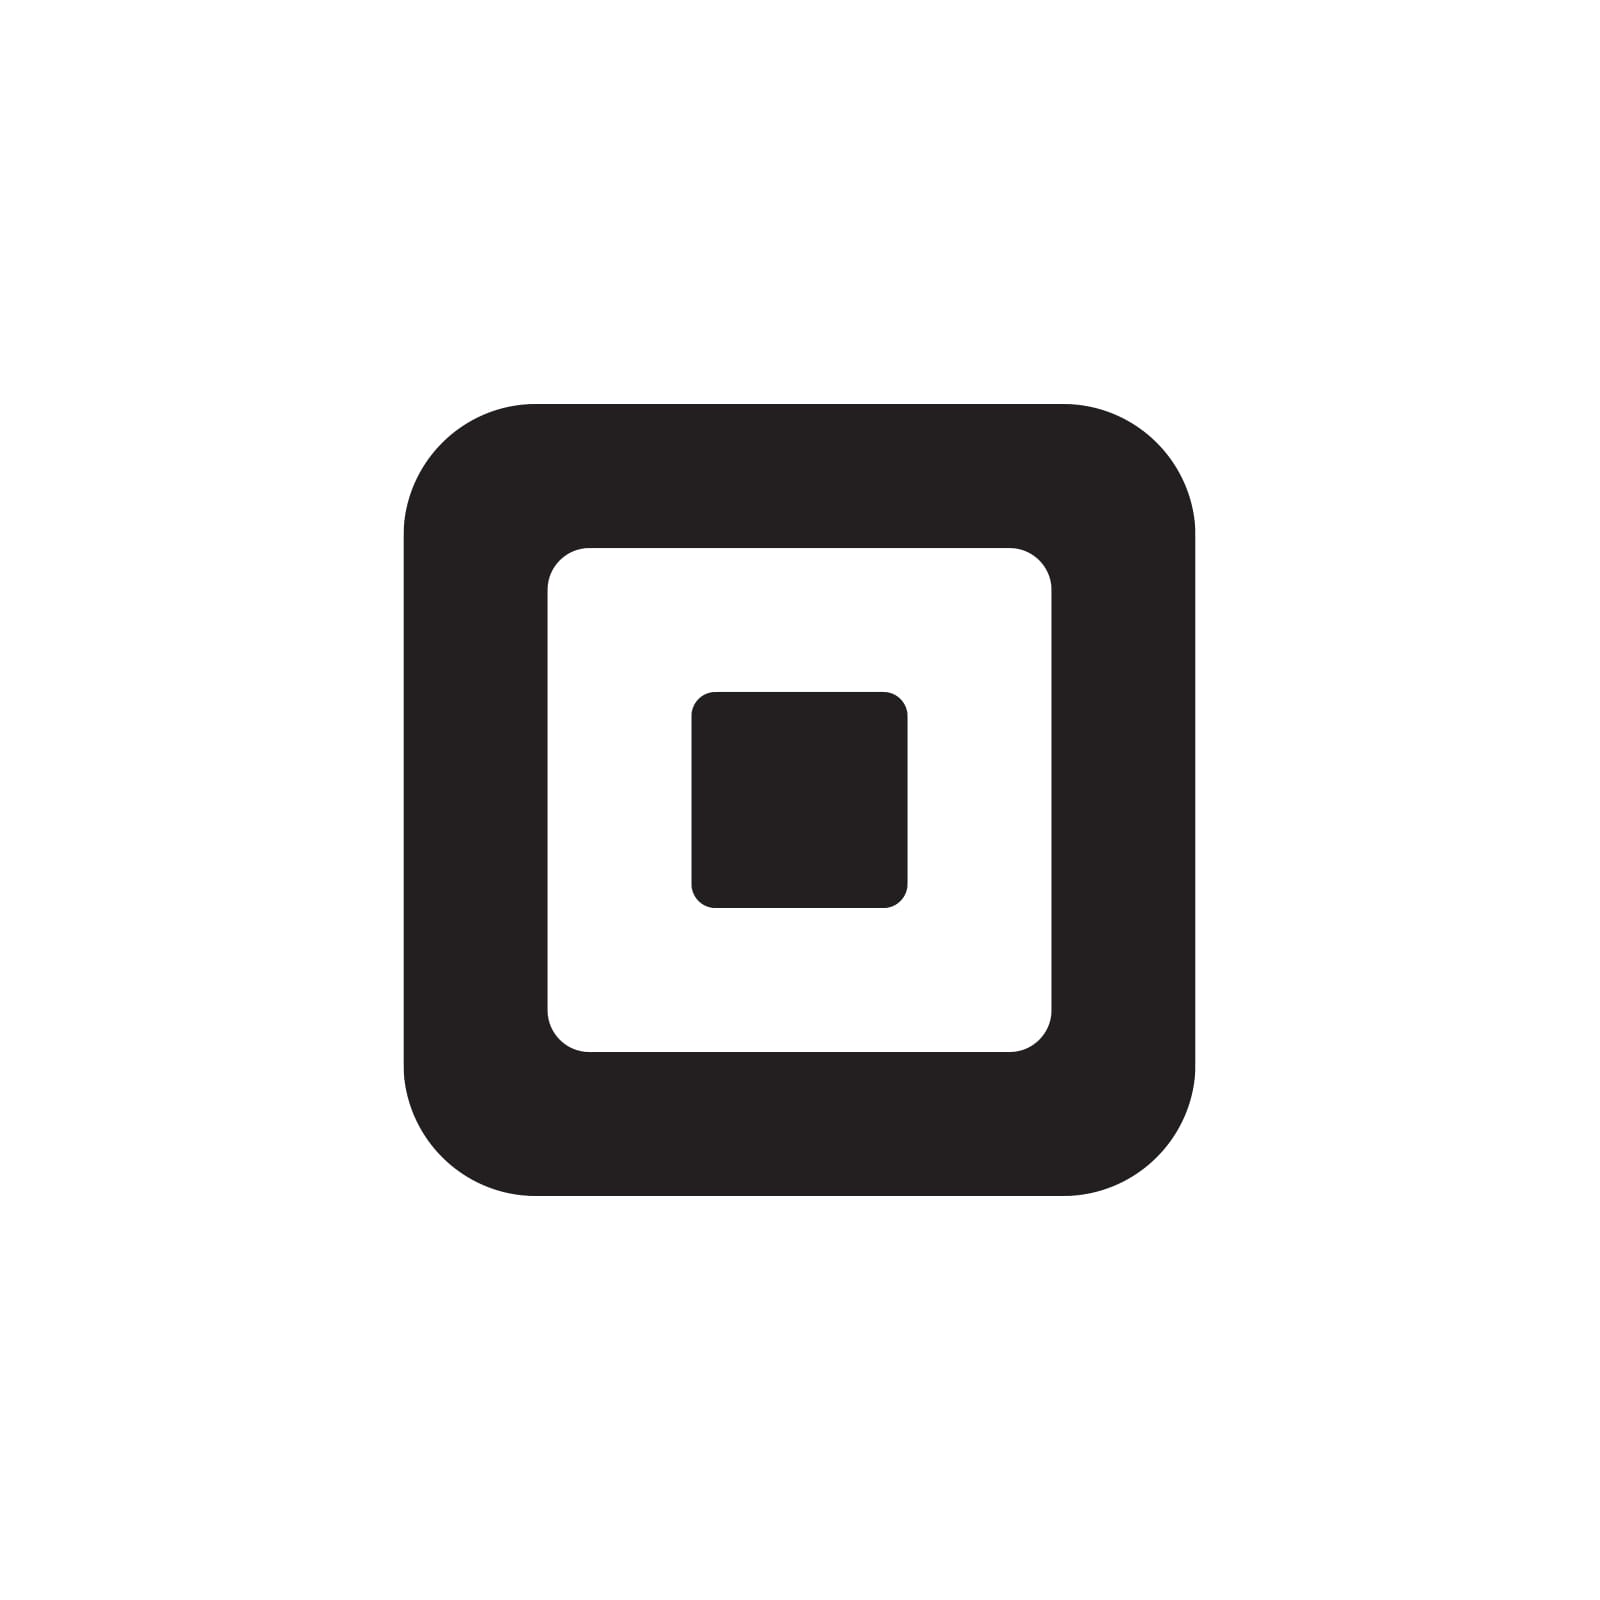 Square Payments logo